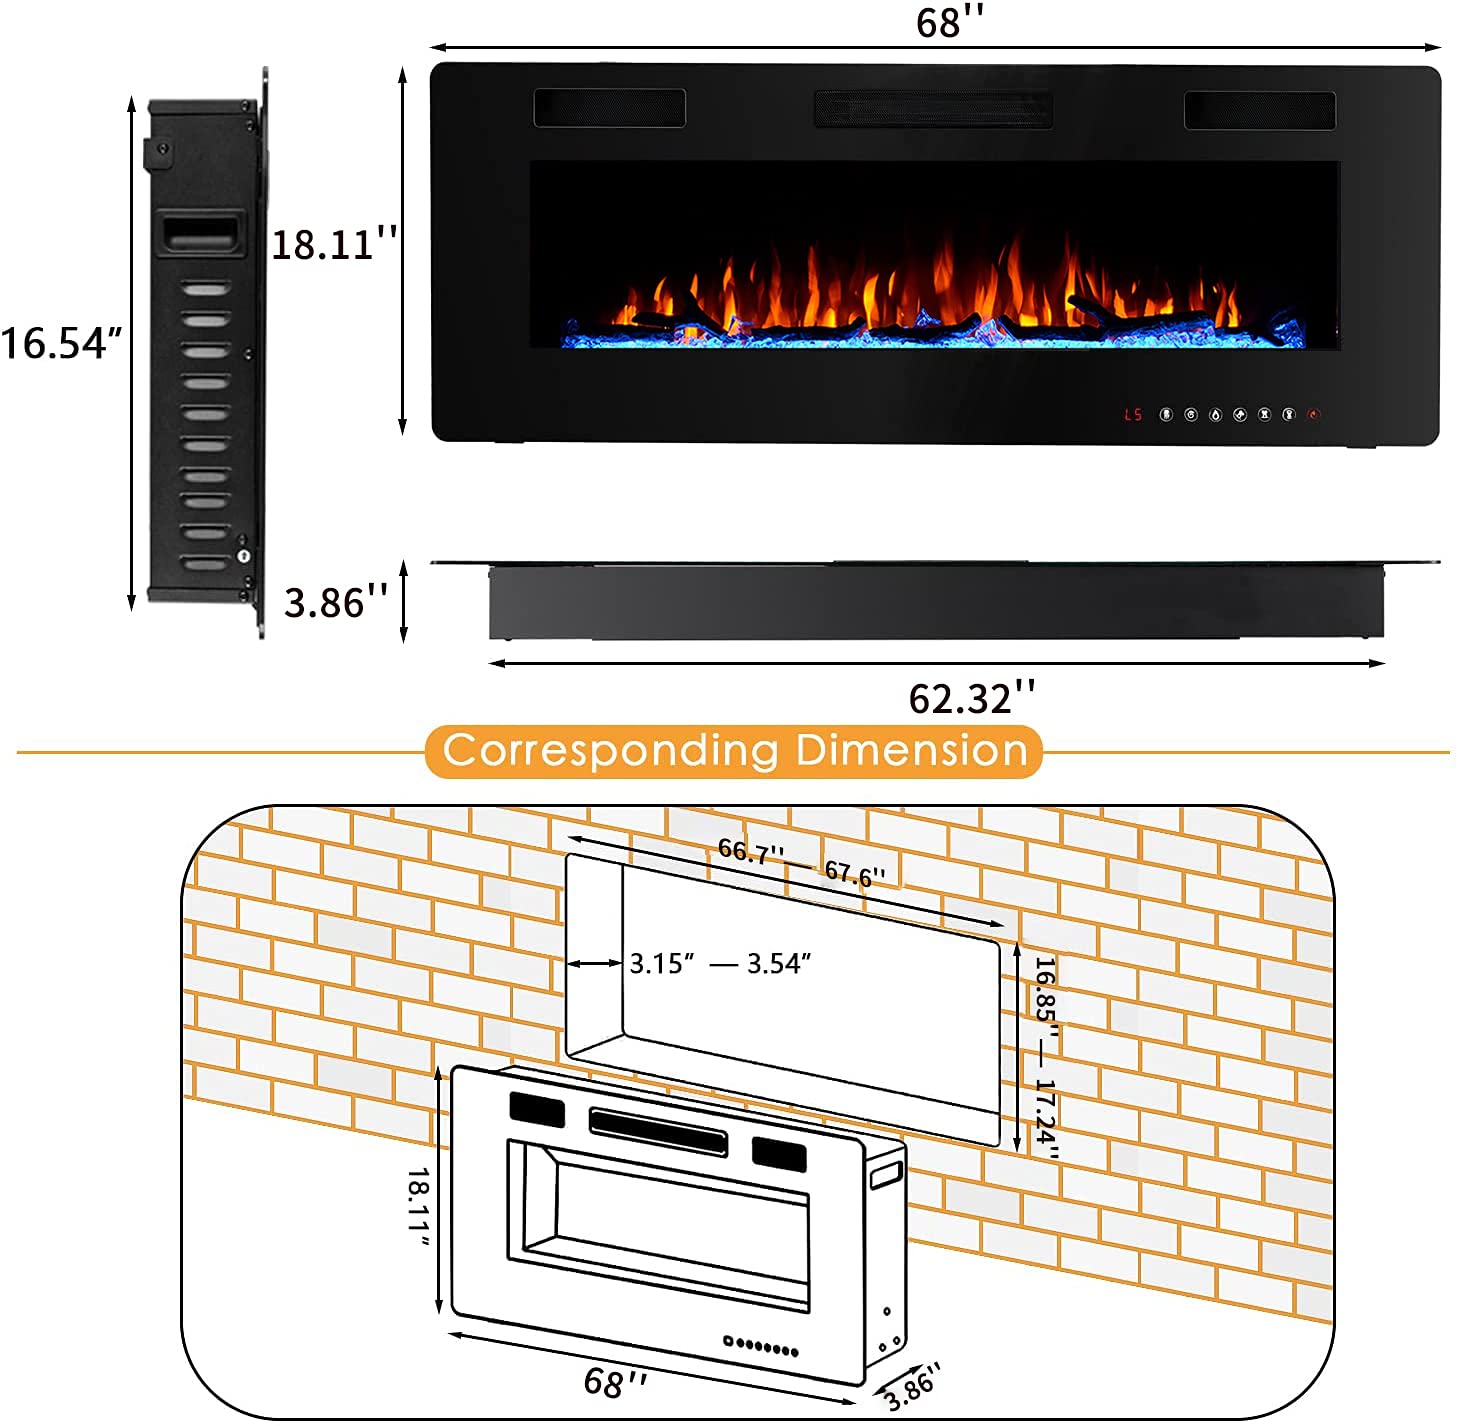 60 inch Electric Fireplace Wall Mounted Led Wall Fireplace Drifting Fireplace Recessed Electric Fireplace Inserts, Adjustable Flame Color Electric Fireplace